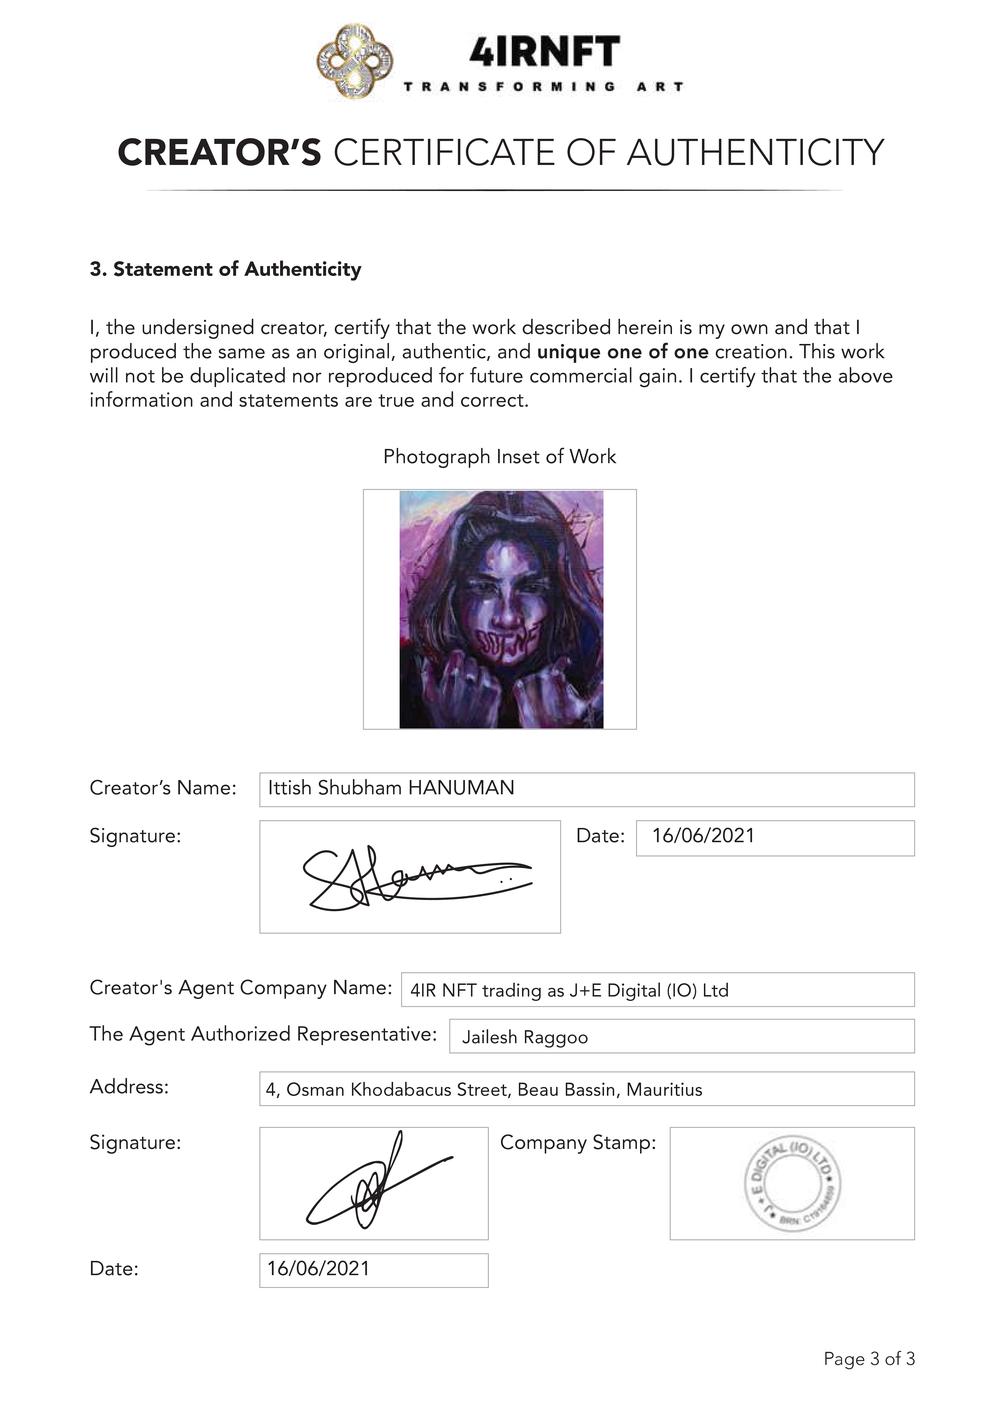 Certificate of Authenticity and Consignment_The01_Hanuman